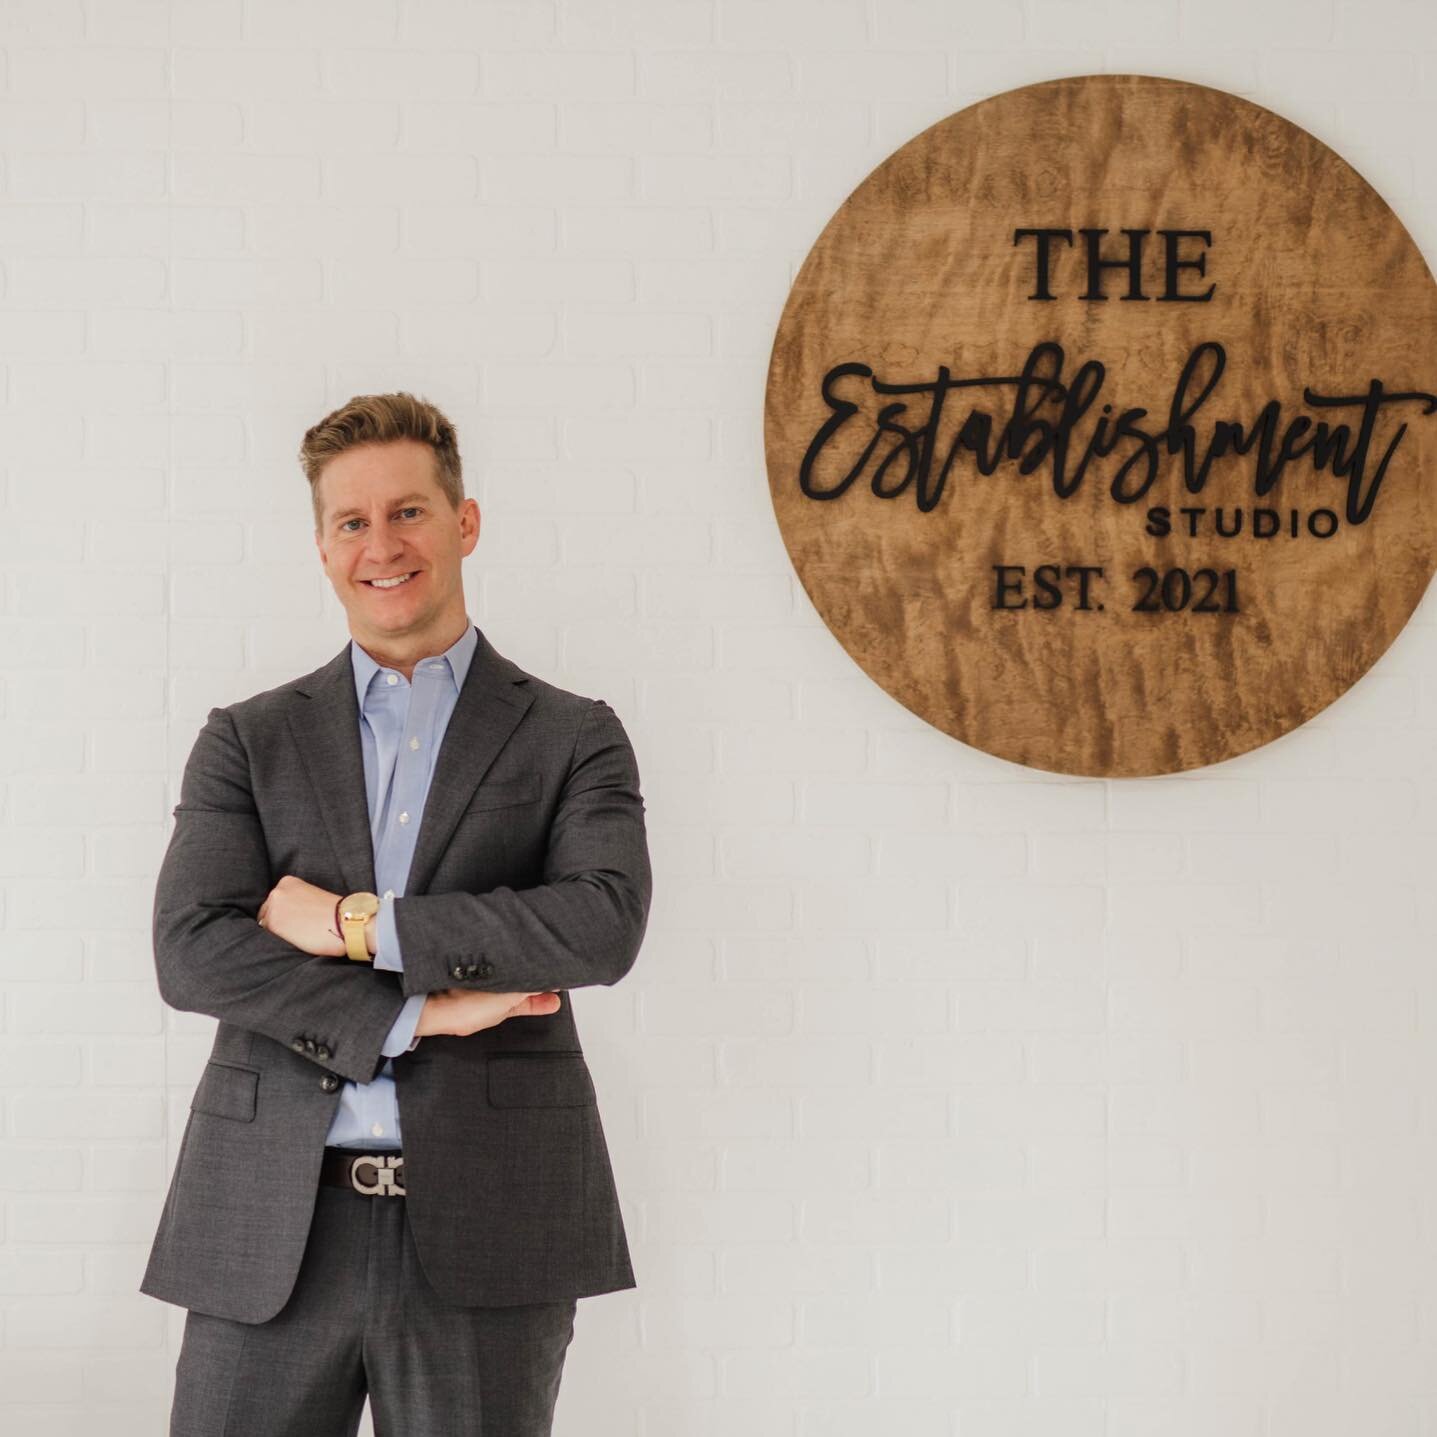 Executive headshots Photo by @erinbakerphotography 

We still love our timber signage by
 @mysignaturetimber 
The quality and customer service is amazing!